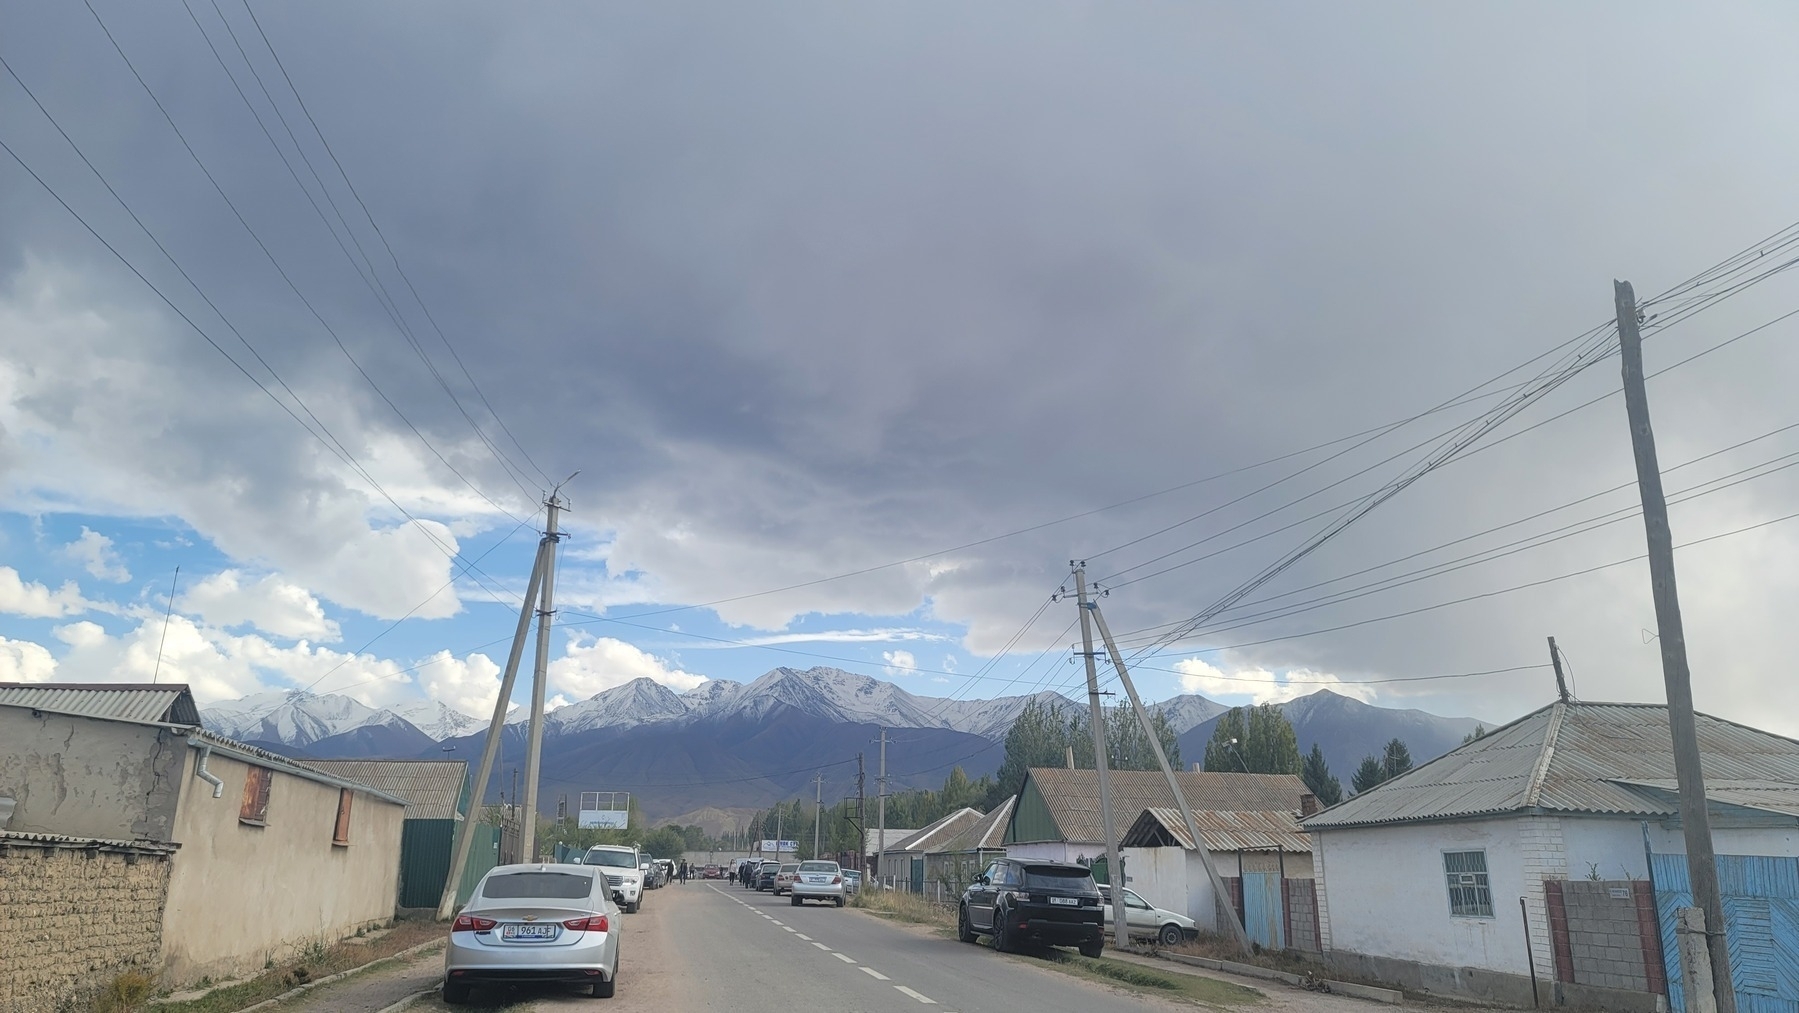 road with houses and power lines on both sides; mountains in the distance. a cloudy day